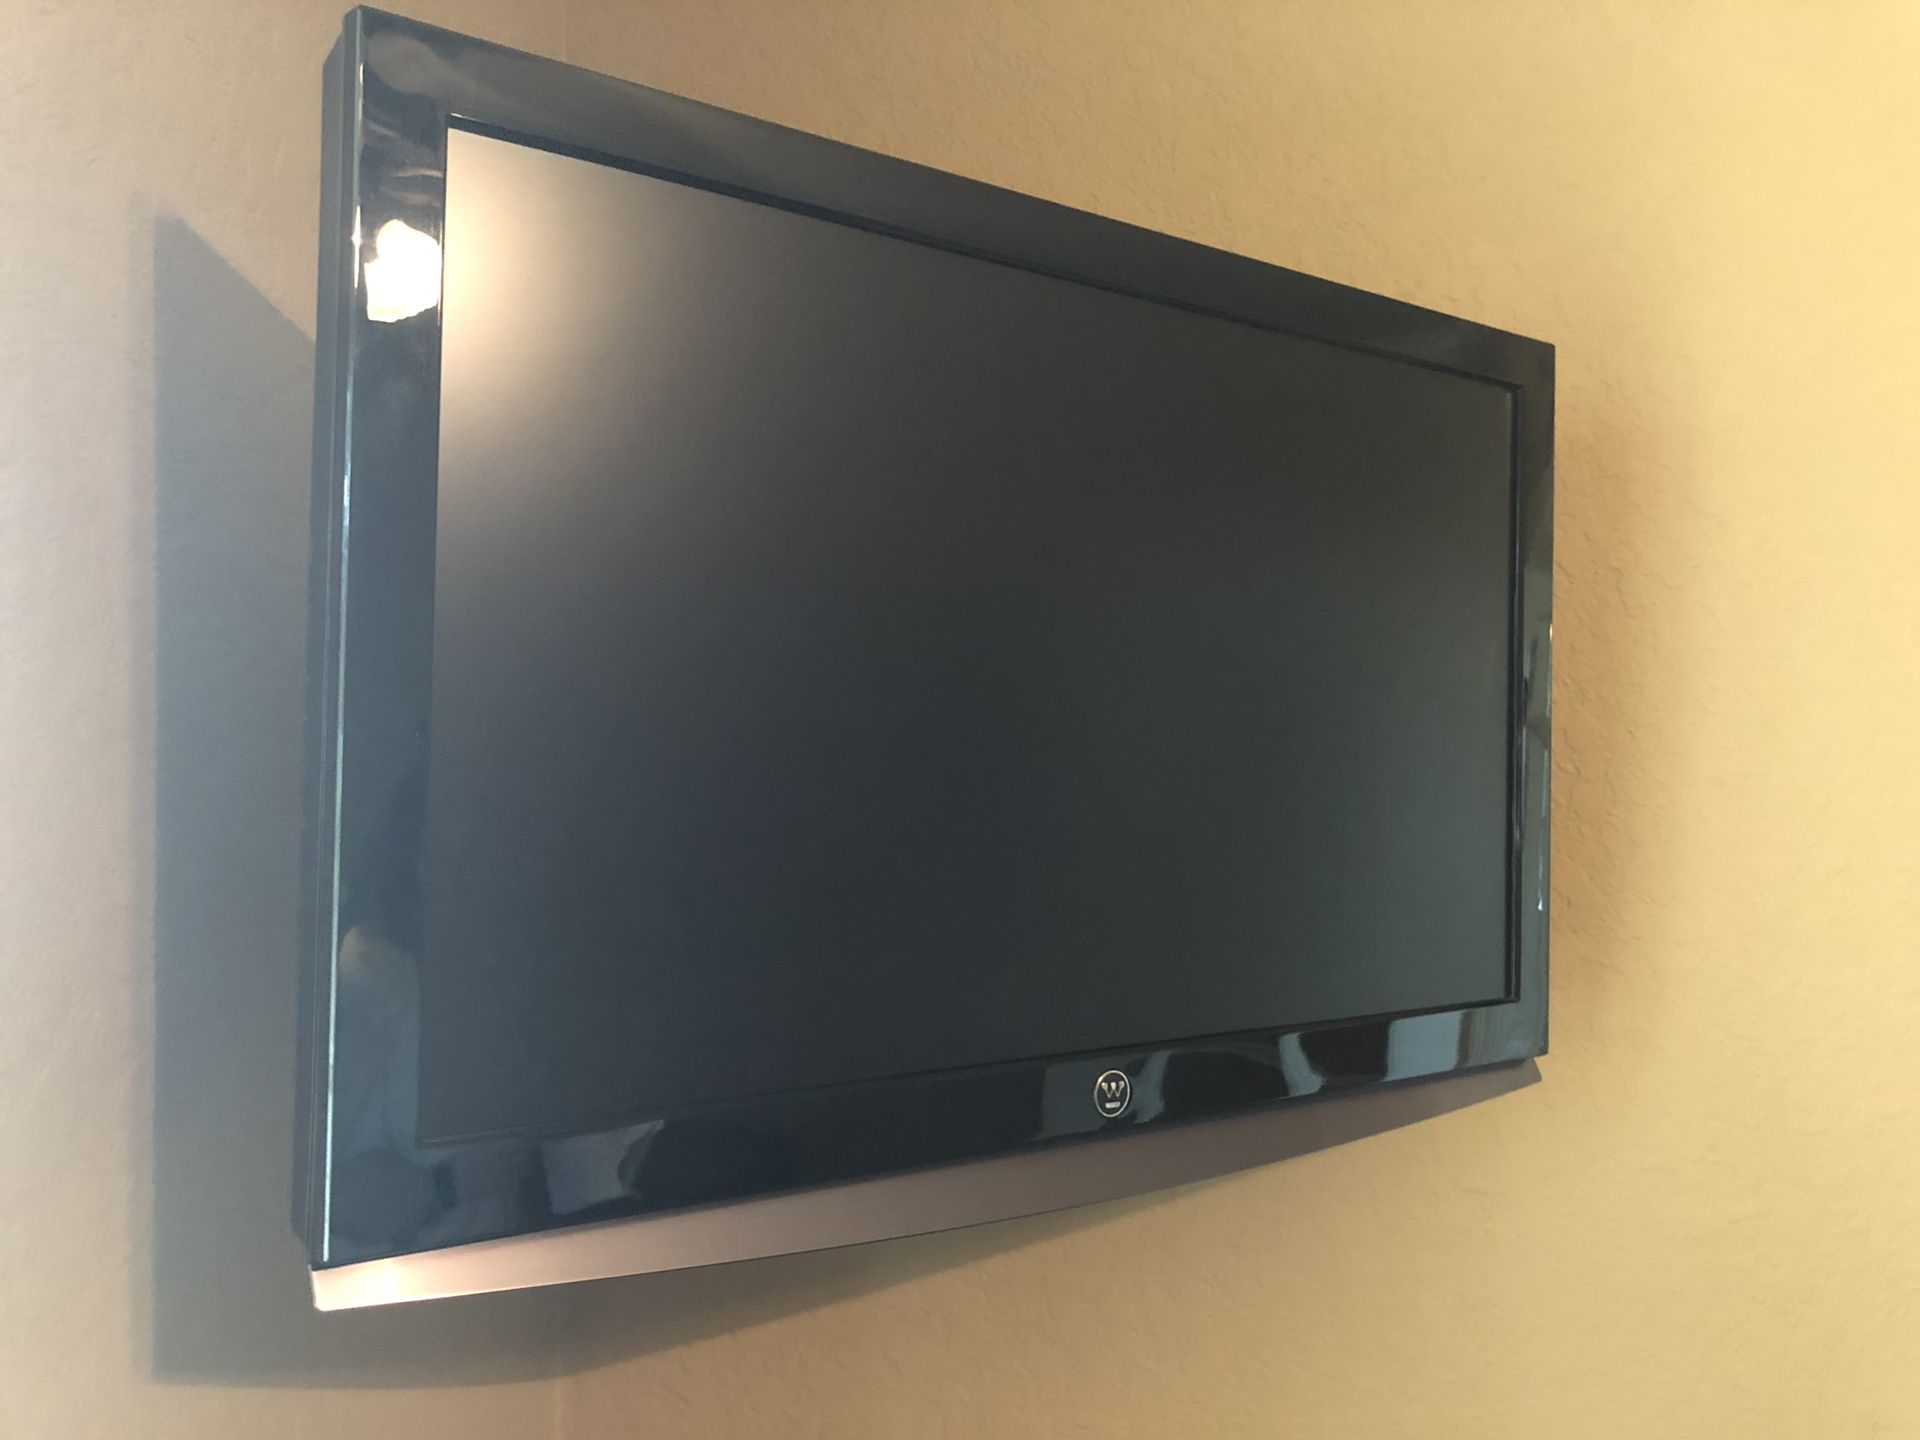 Westinghouse 26 inch TV with wall mount bracket